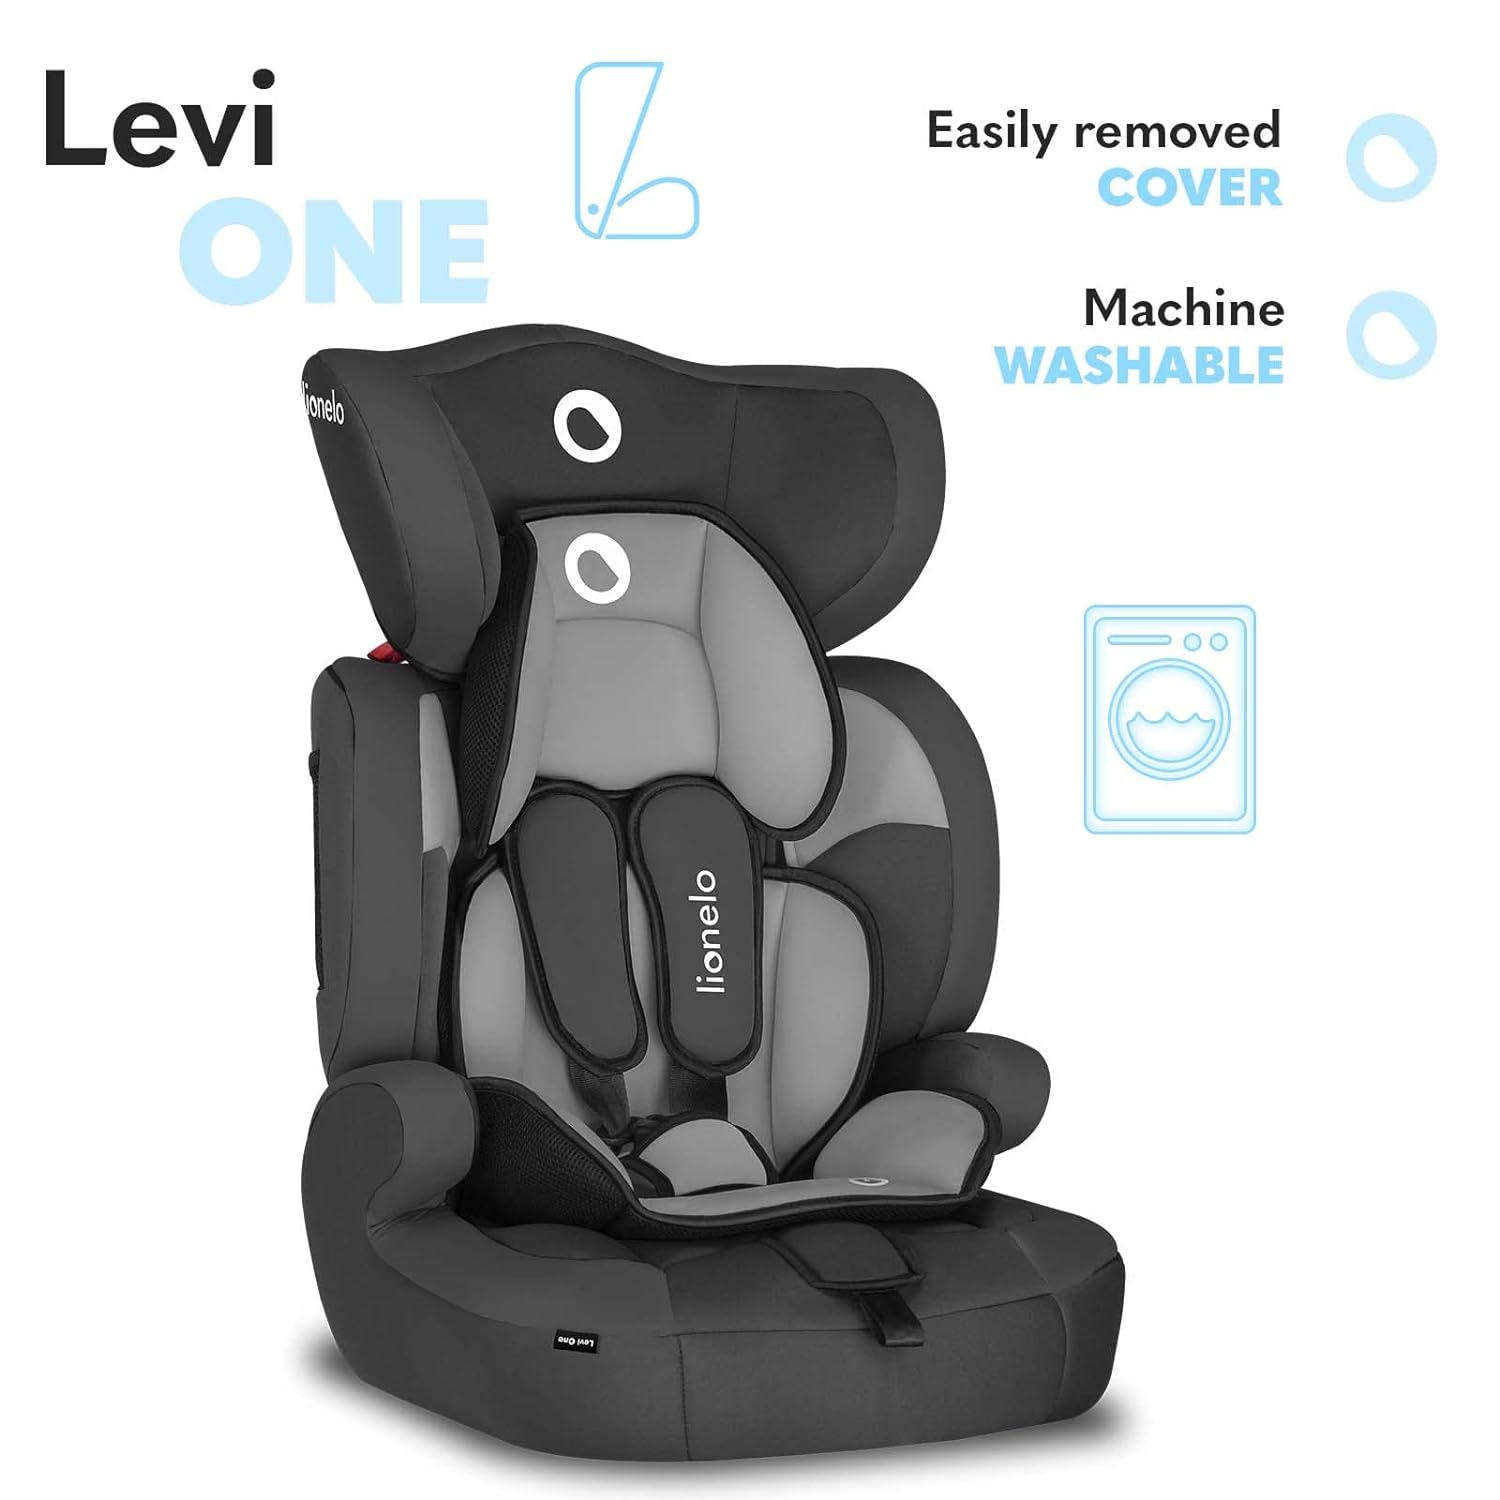 Lionelo Levi One Child Seat 9-36 kg Height Adjustable Recessed Headrest Side Protection Removable Backrest Seat Reducer 5-Point Harness lagoon